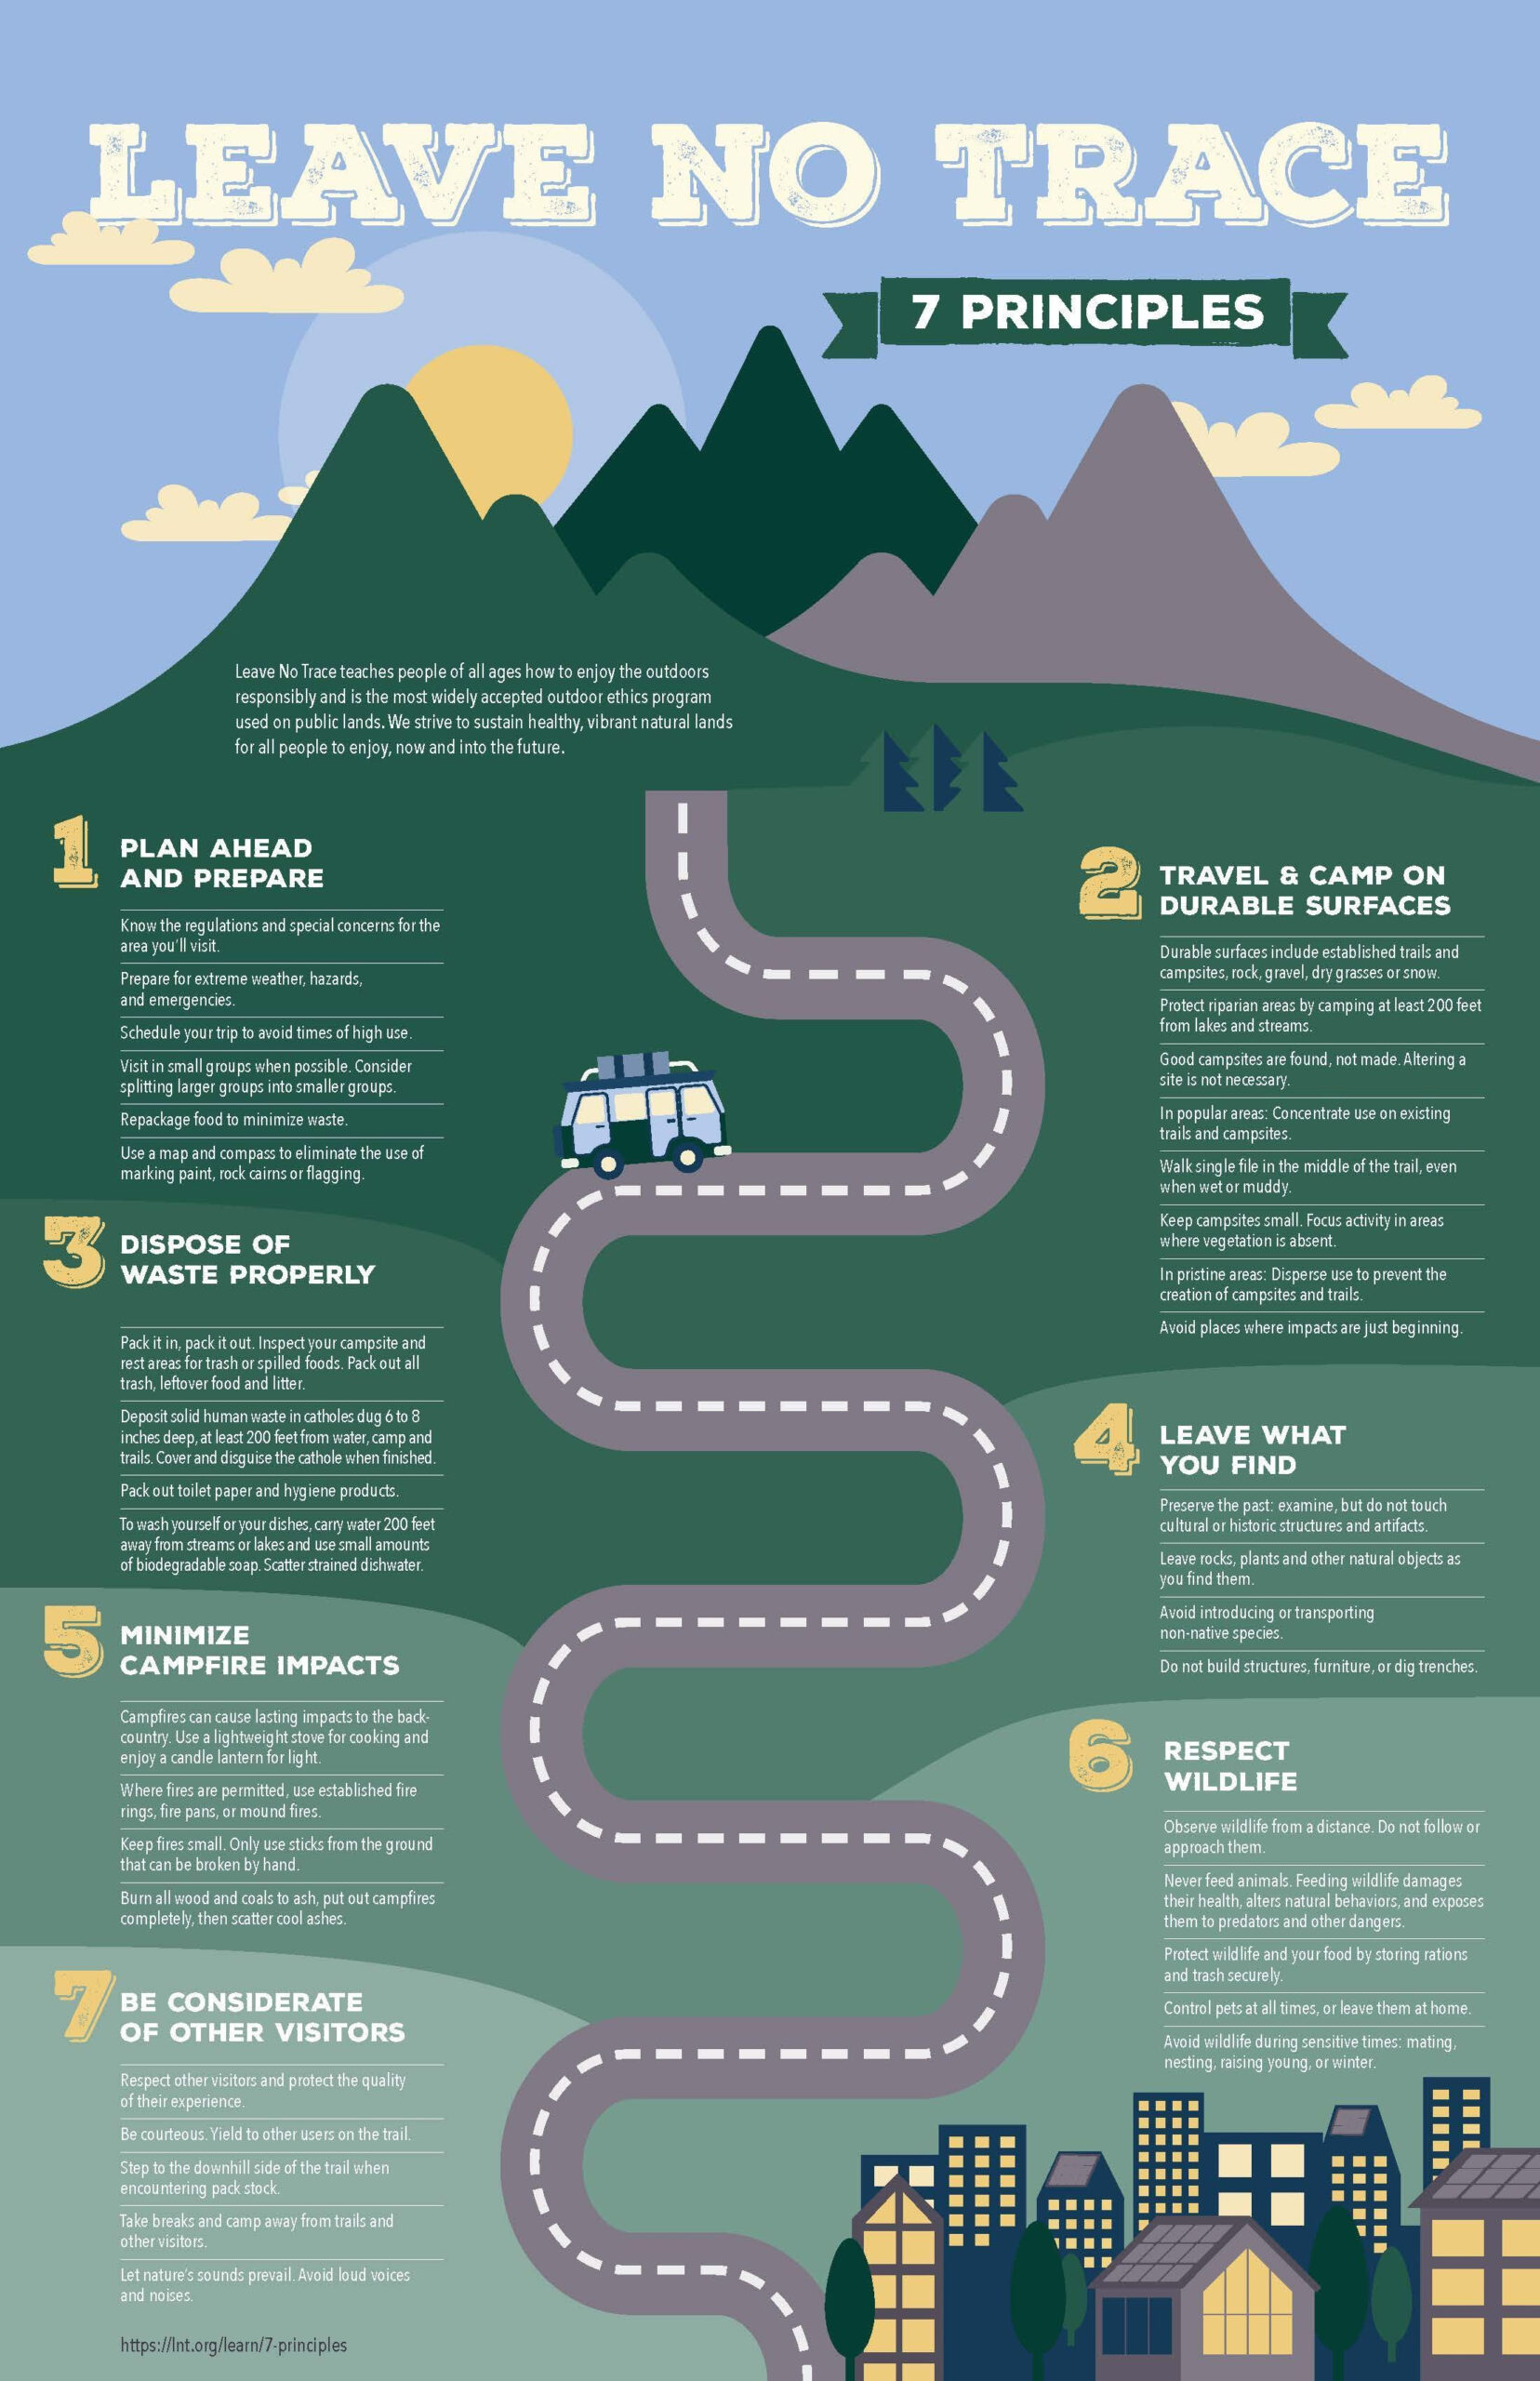 Leave No Trace 7 Principles Infographic cubscouts Leave No Trace 7 